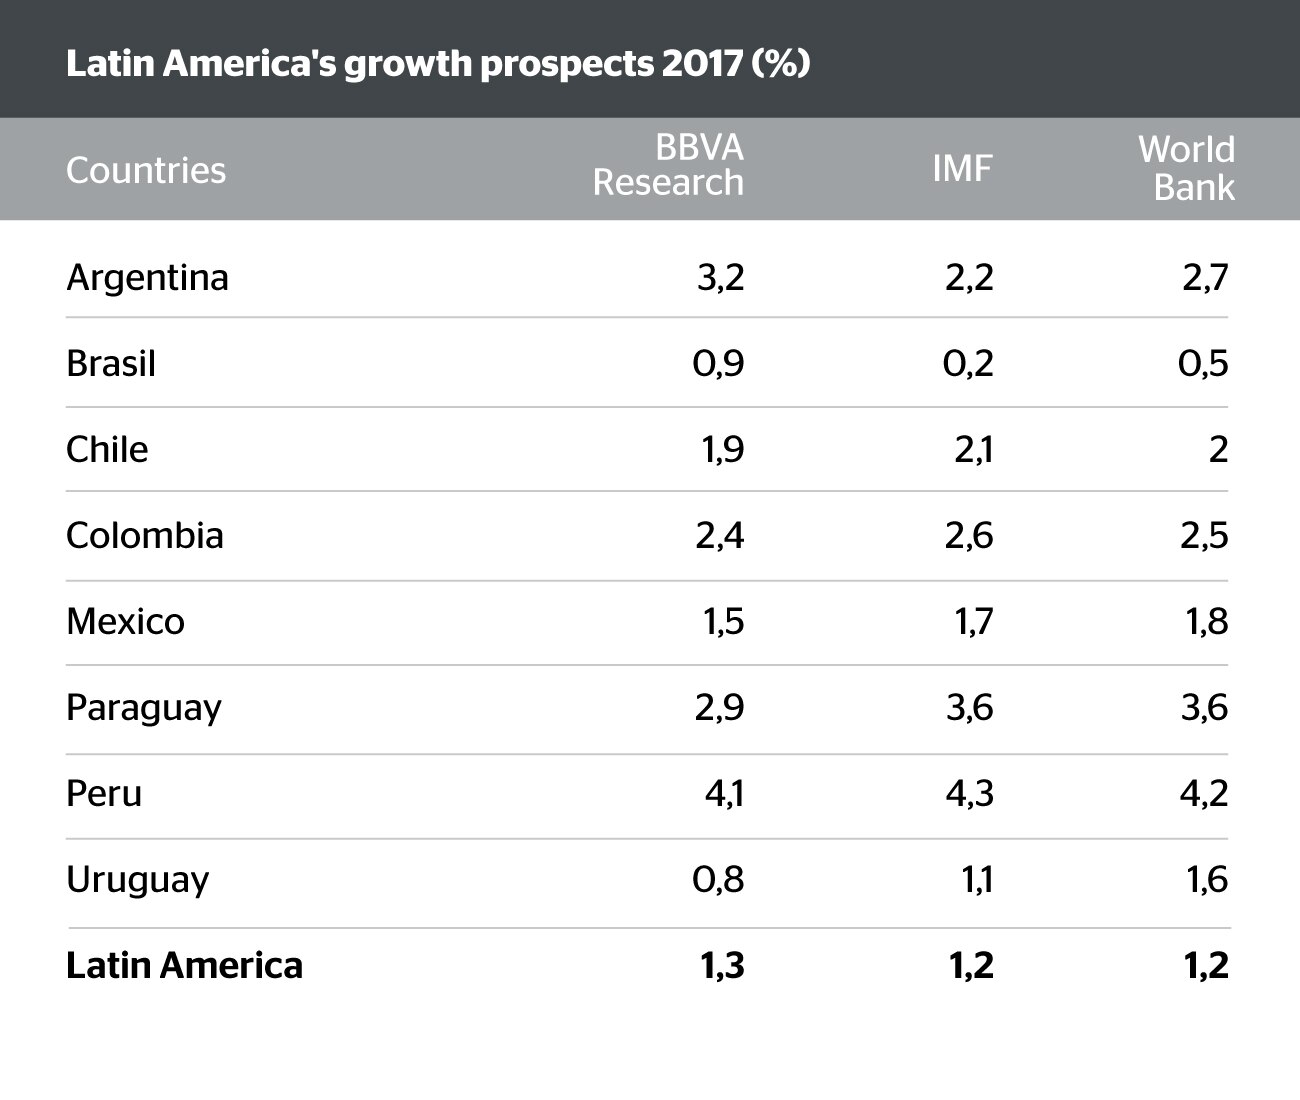 Image of Latin America Growth Prospects 2017 BBVA Research